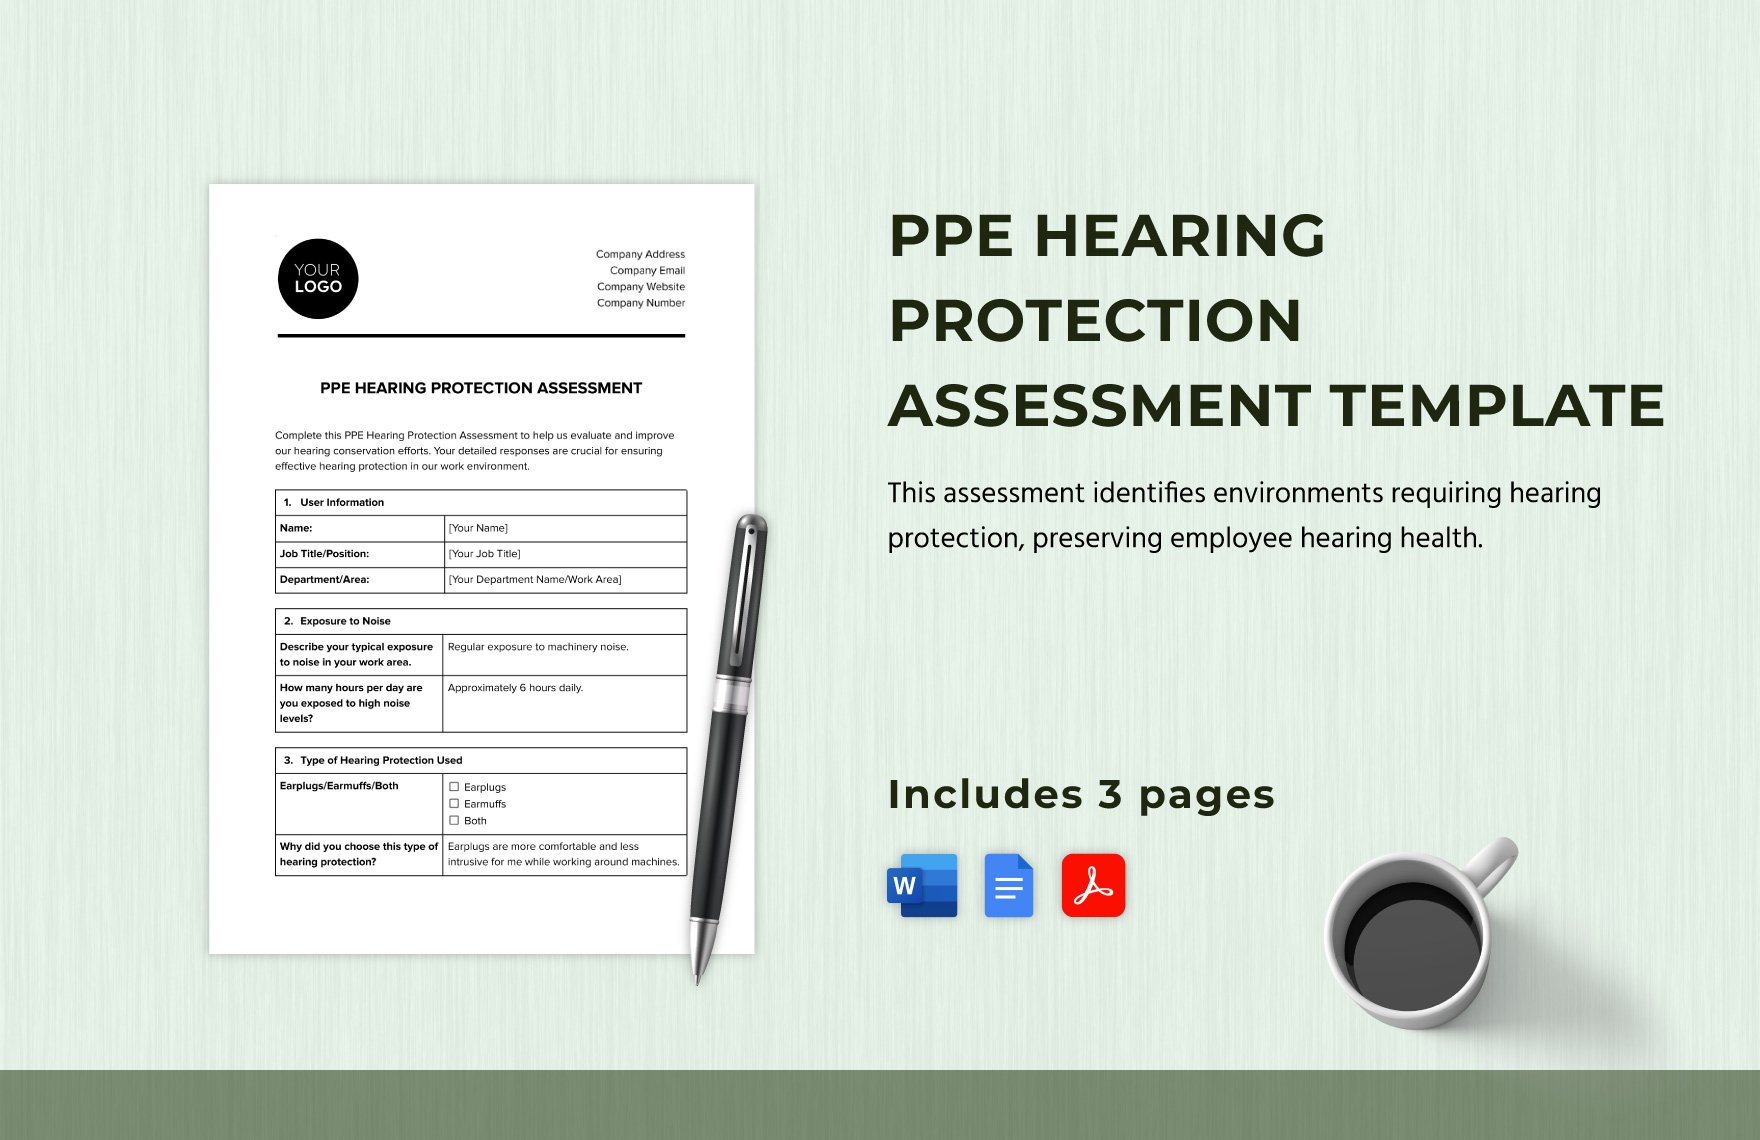 PPE Hearing Protection Assessment Template